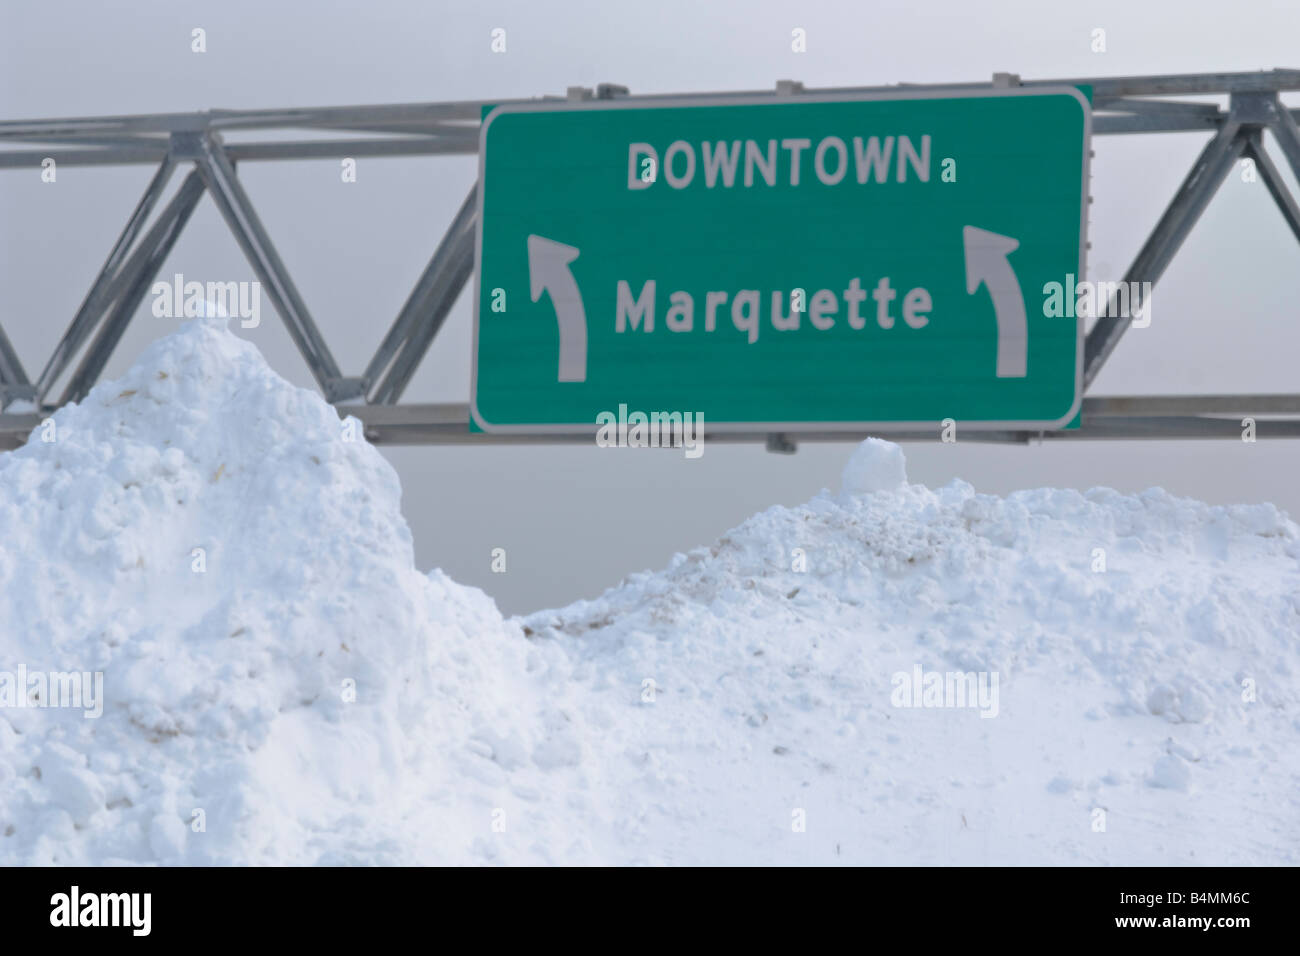 highway-signs-for-the-cities-of-marquette-munising-and-escanaba-in-B4MM6C.jpg